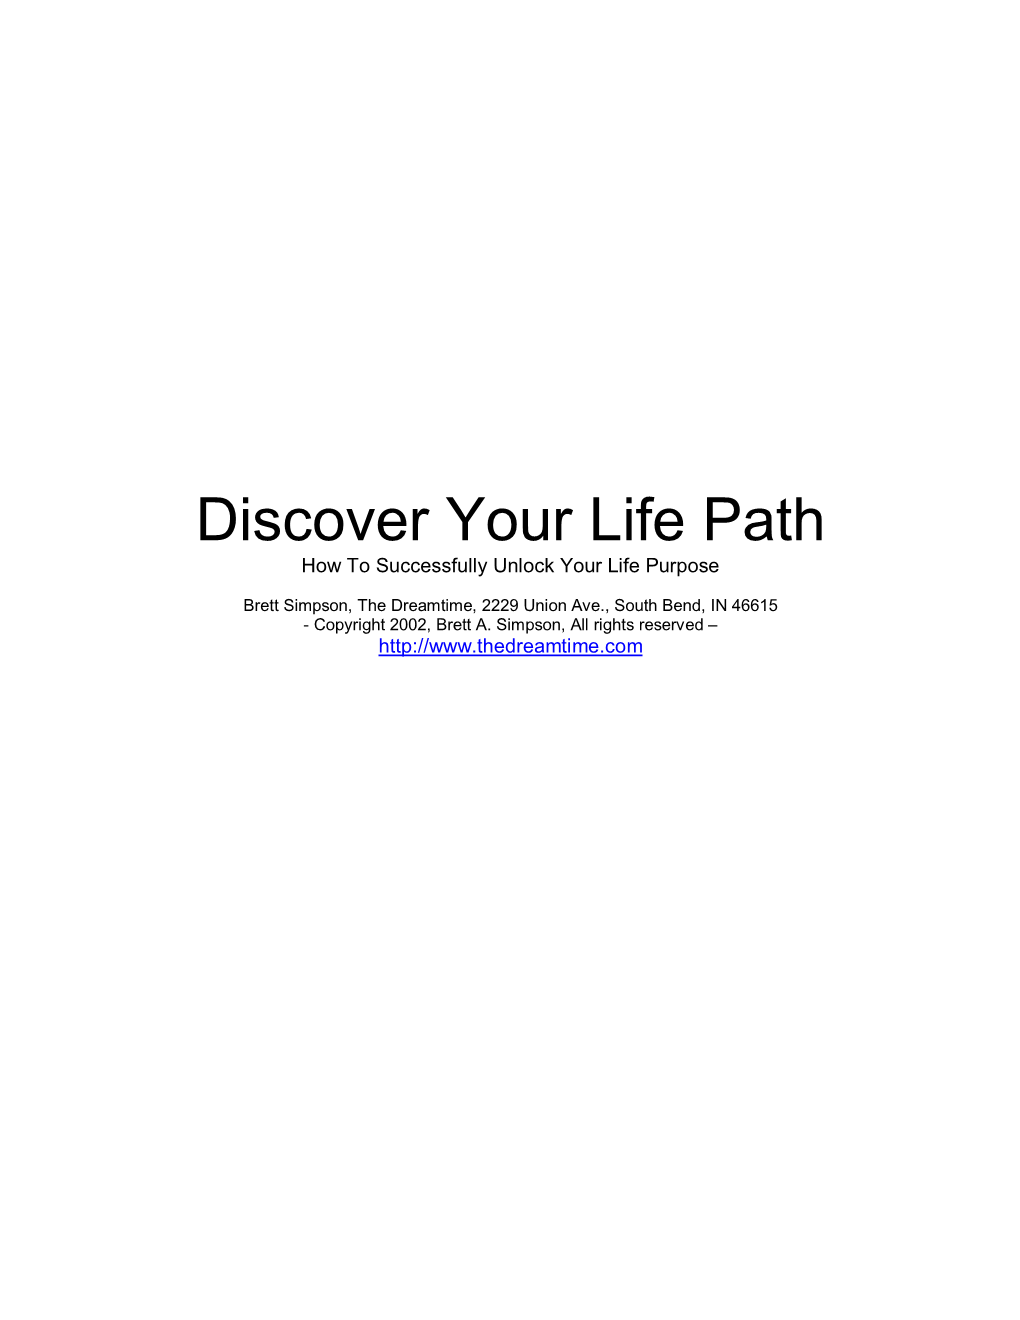 Discover Your Life Path How to Successfully Unlock Your Life Purpose